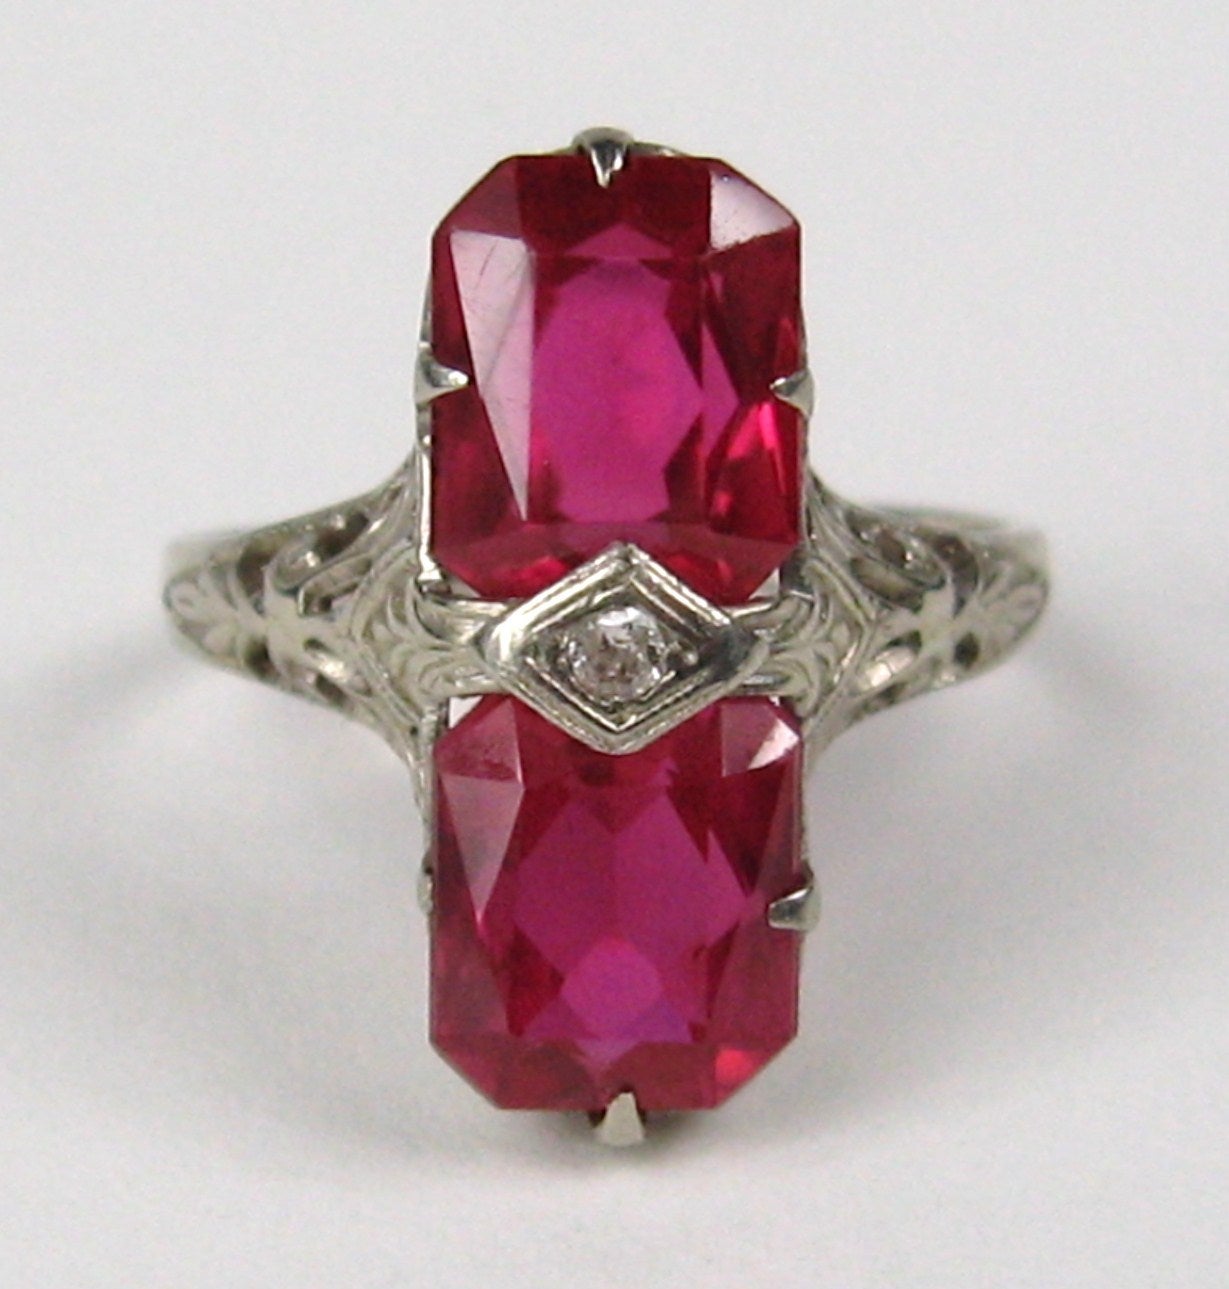 Stunning cut work on this 1920s Ring set in 14K Gold.
Spinel, most likely simulated.

Ring has a petite diamond in the center.
Ring is a size 6 and can be sized by us or your jeweler

Any questions please call or hit Request more information.